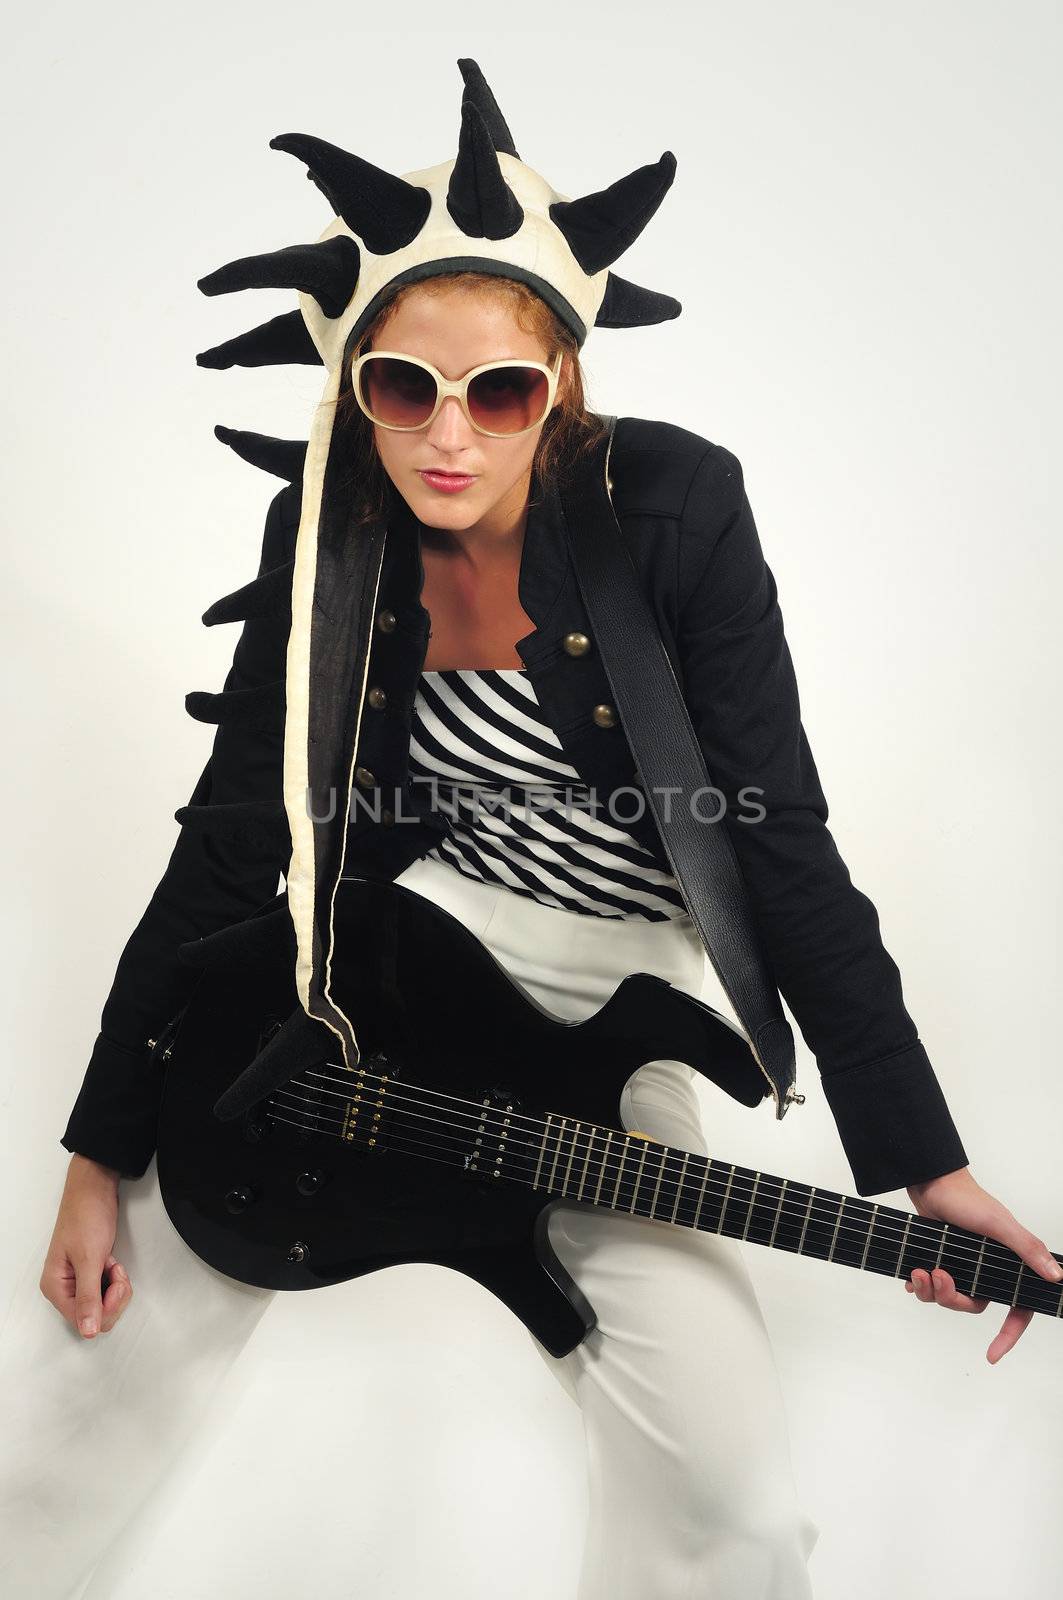 Portrait of young funky girl playing electric guitar isolated on white